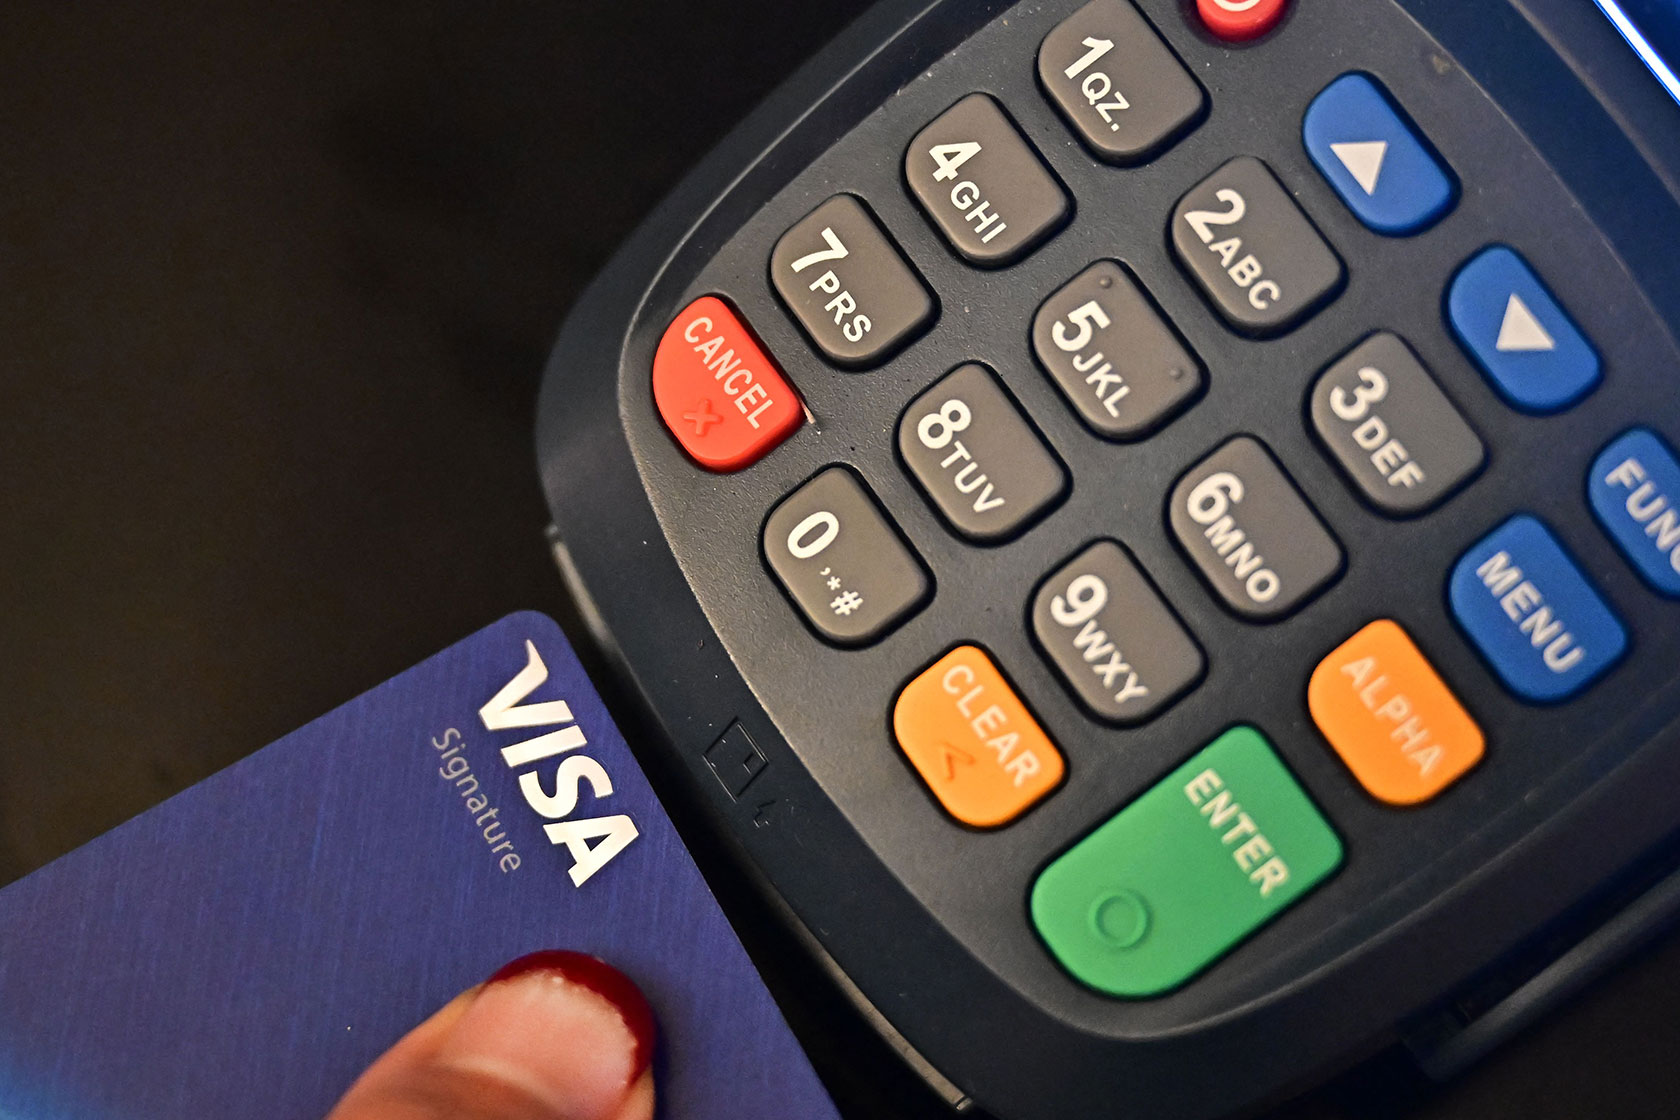 Photo shows a closeup of a person's hand holding a credit card in front of a payment processing machine with numbers and buttons